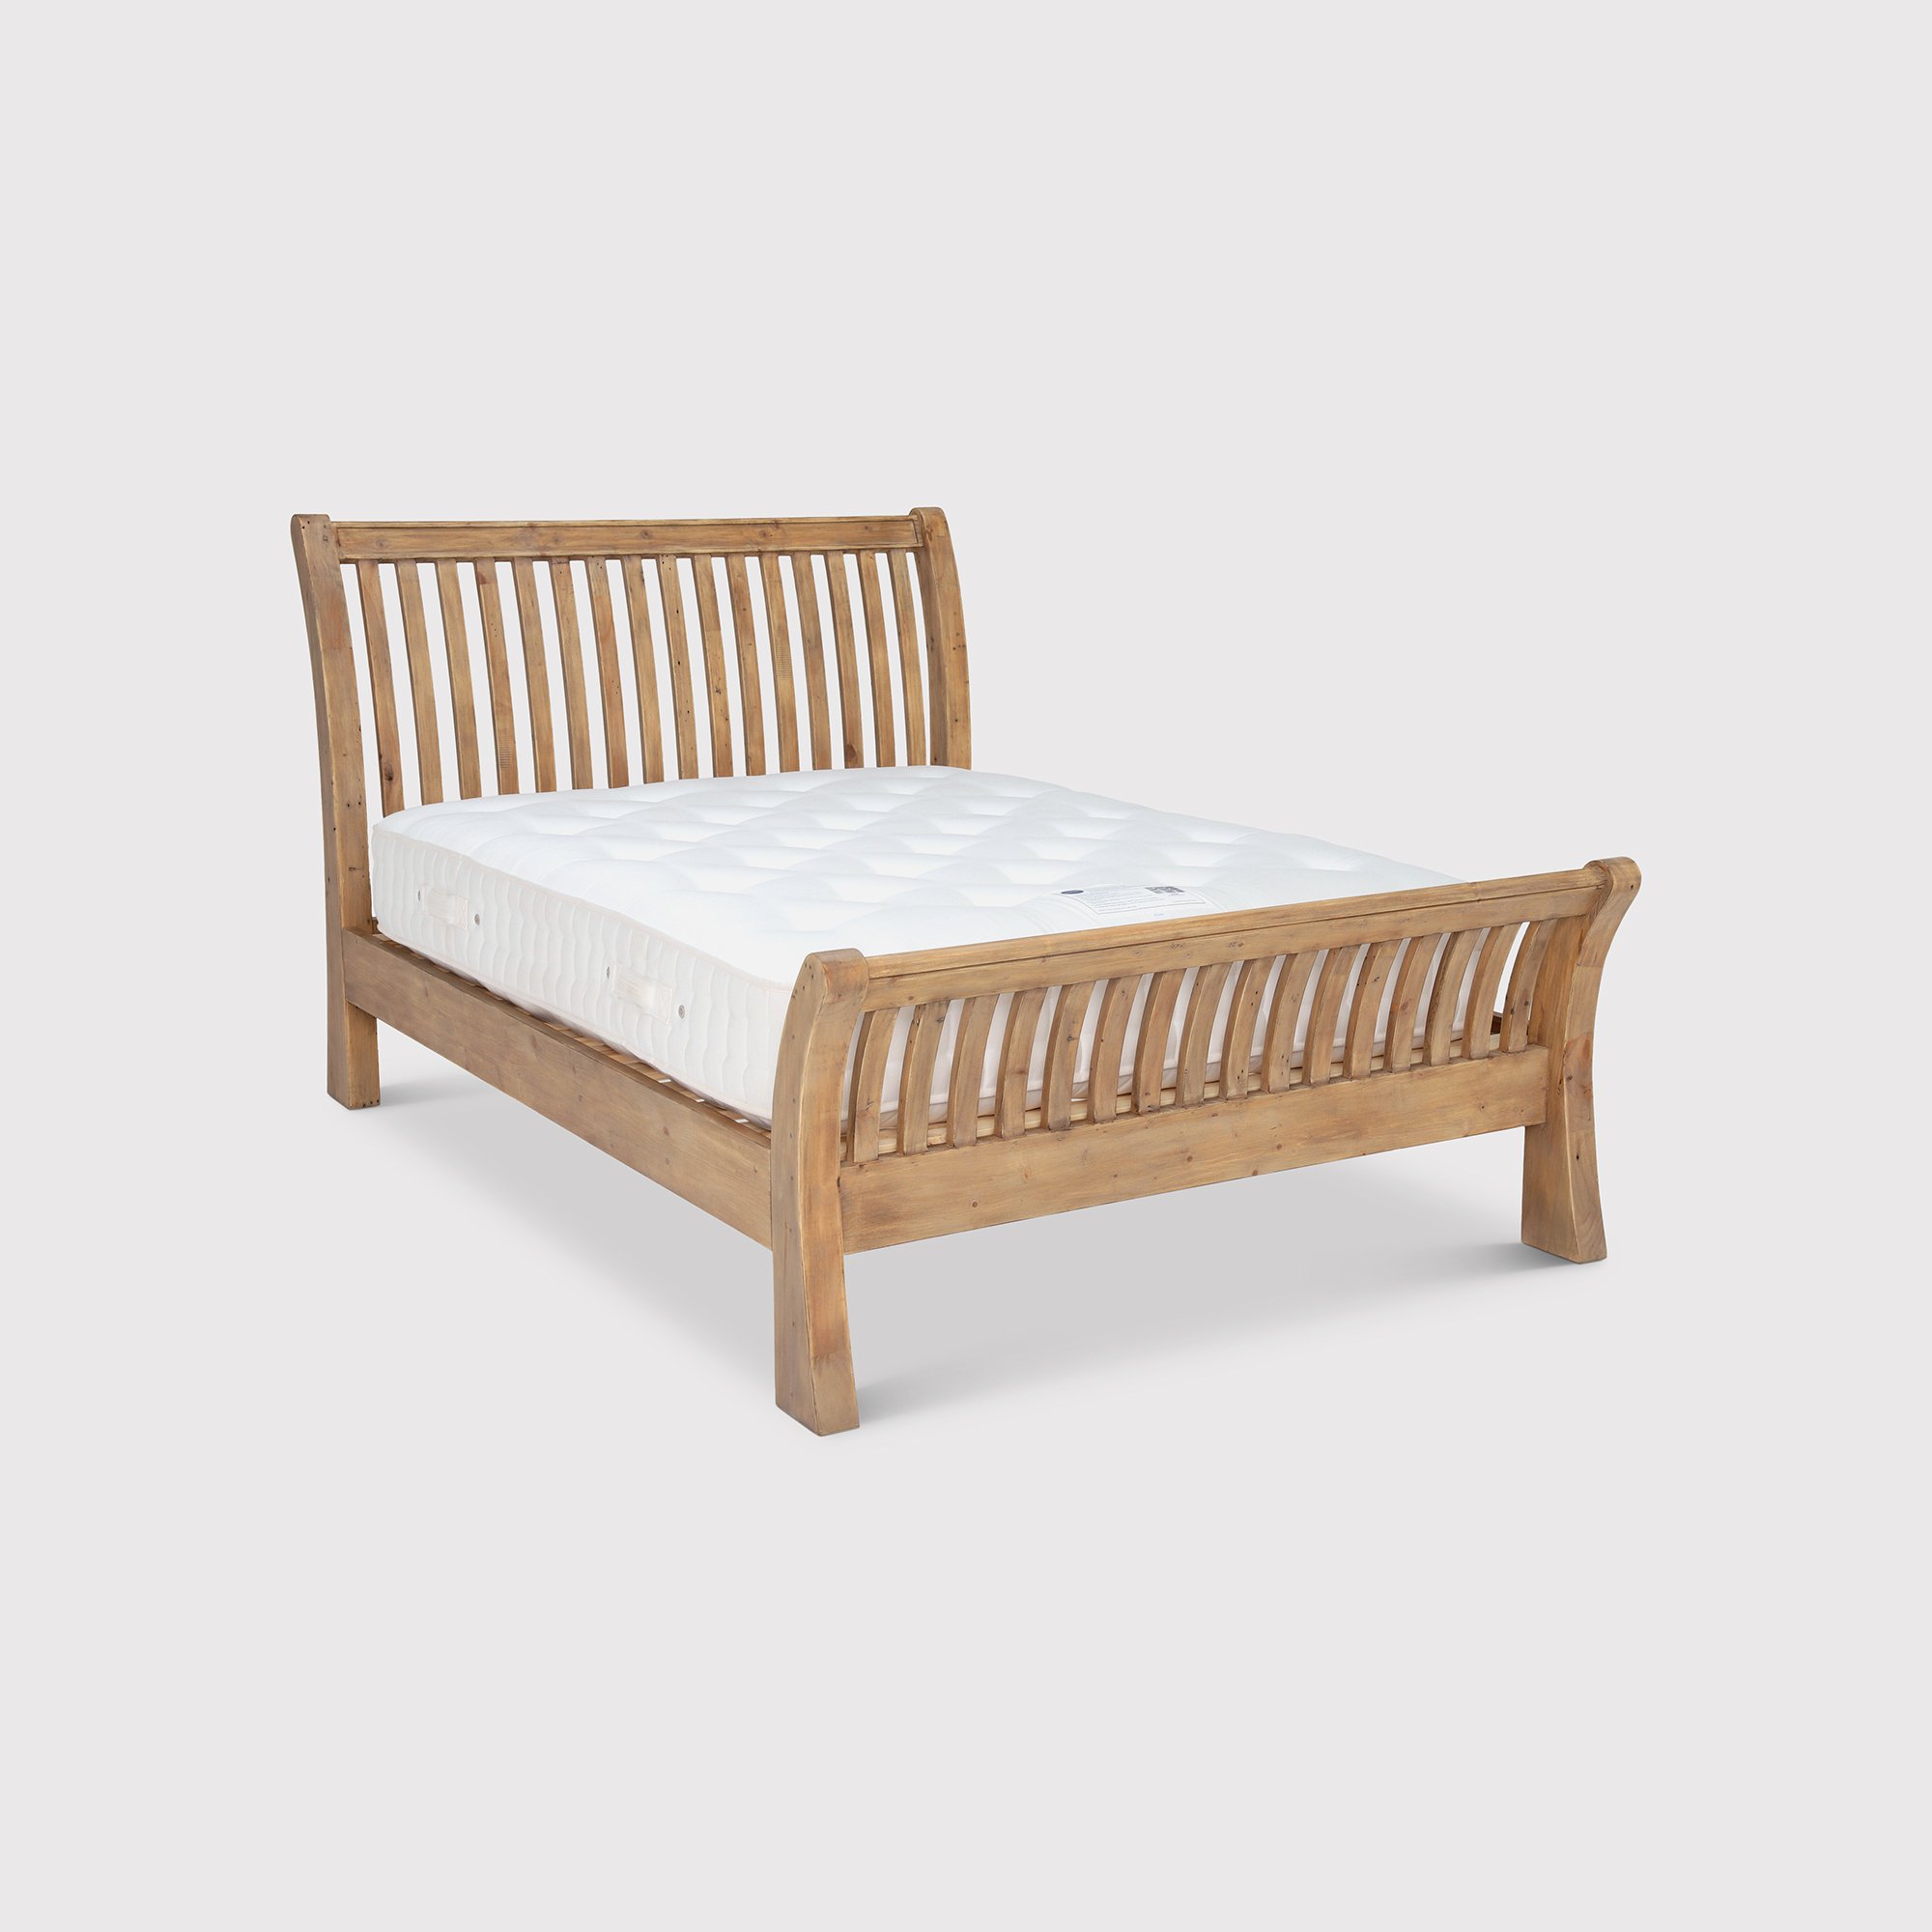 Lewes King Bedframe to fit mattress size 150cm x 200cm, Brown | Barker & Stonehouse